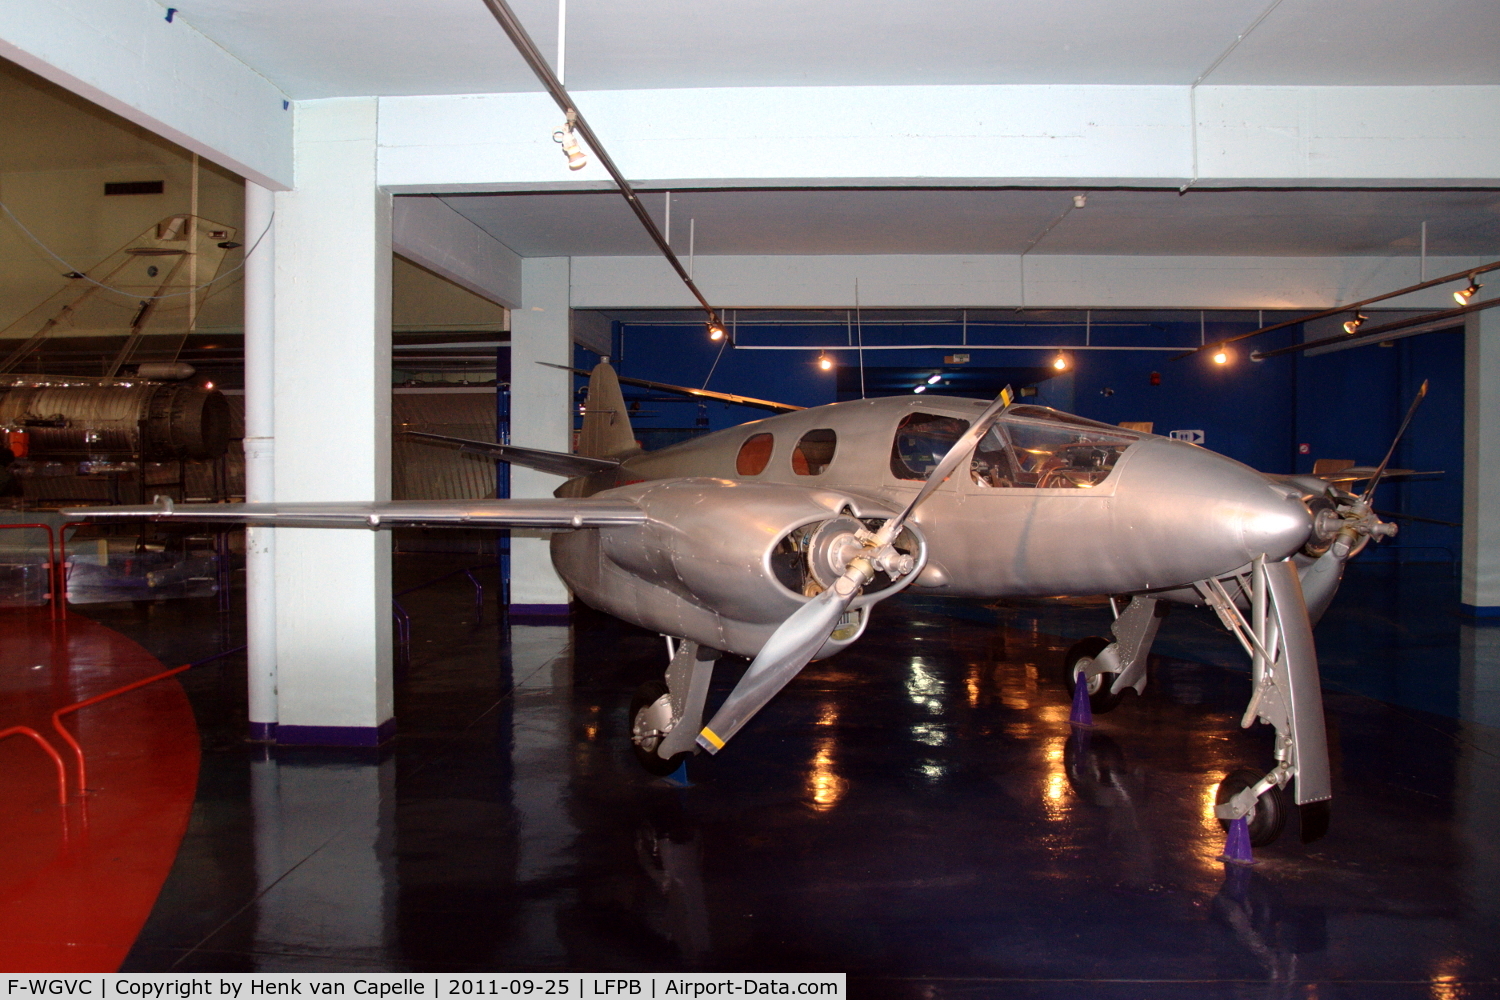 F-WGVC, 1954 Hirch MRA C.100 C/N 01, The sleek looking Hirsch MRA C.100 experimental aircraft in the Musee de l' Air.